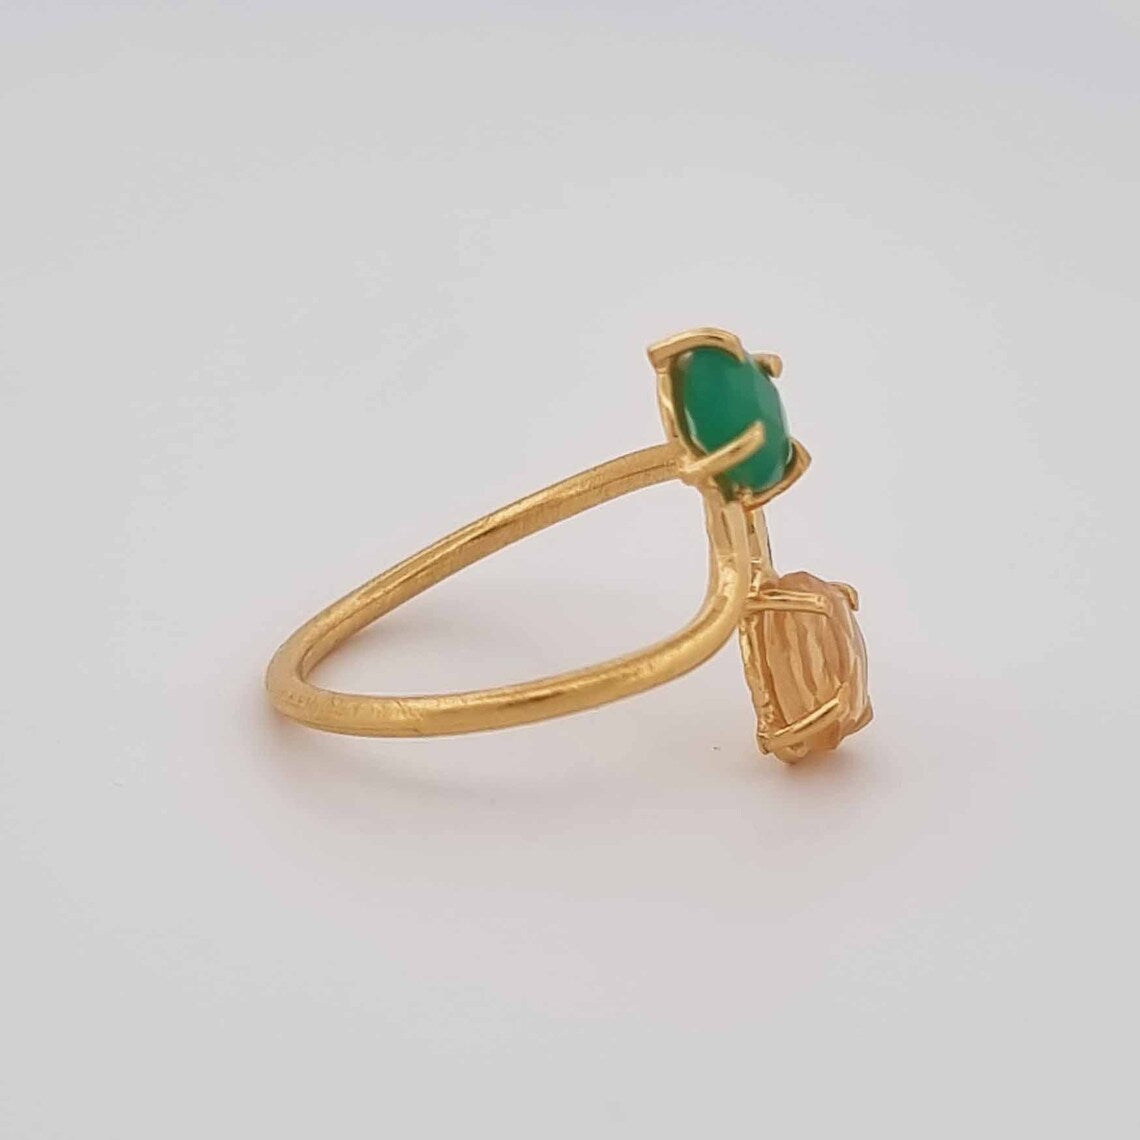 Natural Citrine Ring, Green Onyx Citrine Ring, Gold Ring, Dual Stone Ring, Handmade Ring, Statement Ring For Women's, Gold Plated Ring Adjustable